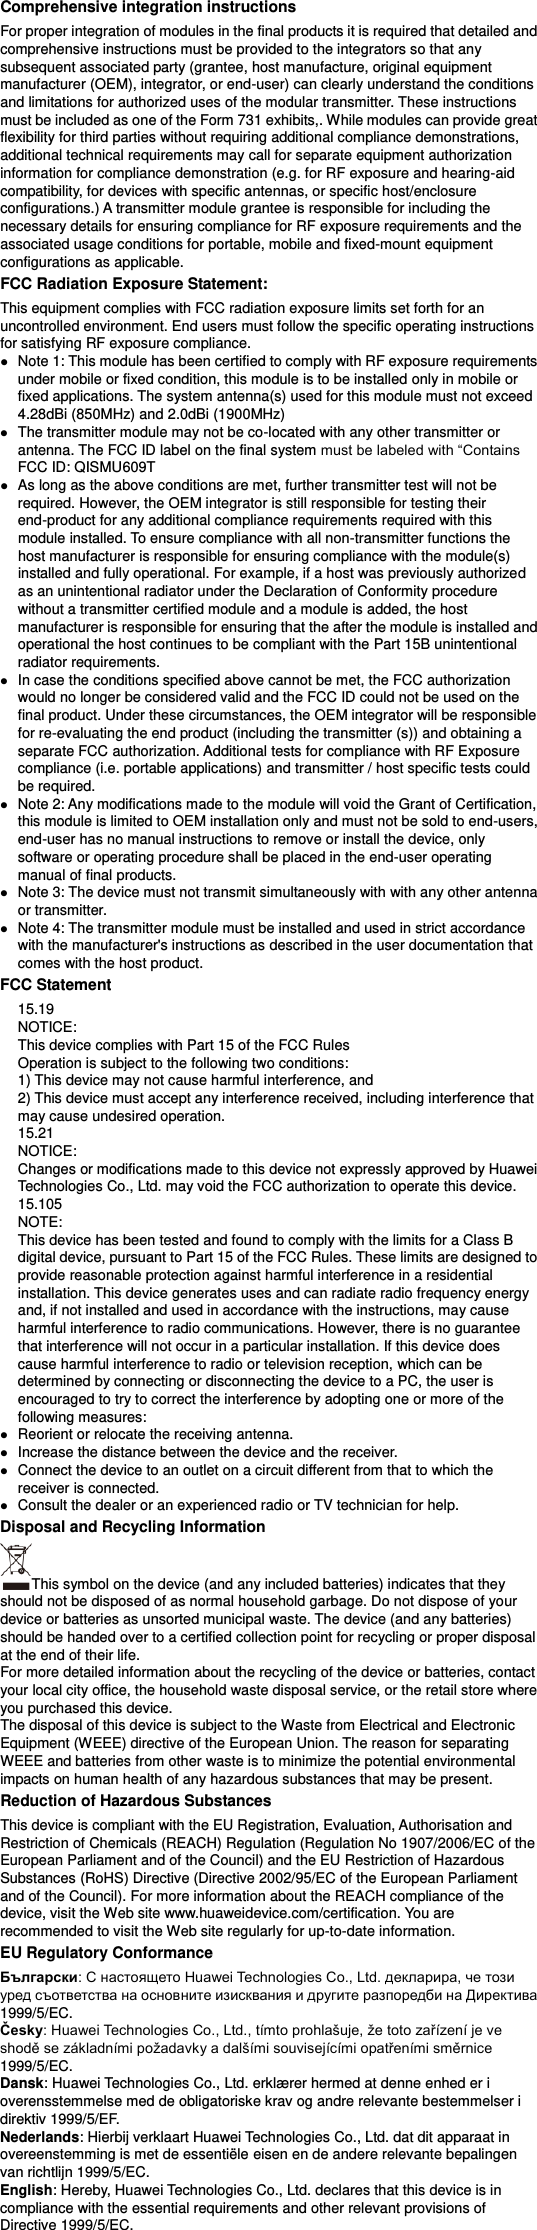 Comprehensive integration instructions   For proper integration of modules in the final products it is required that detailed and comprehensive instructions must be provided to the integrators so that any subsequent associated party (grantee, host manufacture, original equipment manufacturer (OEM), integrator, or end-user) can clearly understand the conditions and limitations for authorized uses of the modular transmitter. These instructions must be included as one of the Form 731 exhibits,. While modules can provide great flexibility for third parties without requiring additional compliance demonstrations, additional technical requirements may call for separate equipment authorization information for compliance demonstration (e.g. for RF exposure and hearing-aid compatibility, for devices with specific antennas, or specific host/enclosure configurations.) A transmitter module grantee is responsible for including the necessary details for ensuring compliance for RF exposure requirements and the associated usage conditions for portable, mobile and fixed-mount equipment configurations as applicable.   FCC Radiation Exposure Statement: This equipment complies with FCC radiation exposure limits set forth for an uncontrolled environment. End users must follow the specific operating instructions for satisfying RF exposure compliance.  Note 1: This module has been certified to comply with RF exposure requirements under mobile or fixed condition, this module is to be installed only in mobile or fixed applications. The system antenna(s) used for this module must not exceed 4.28dBi (850MHz) and 2.0dBi (1900MHz)  The transmitter module may not be co-located with any other transmitter or antenna. The FCC ID label on the final system FCC ID: QISMU609T  As long as the above conditions are met, further transmitter test will not be required. However, the OEM integrator is still responsible for testing their end-product for any additional compliance requirements required with this module installed. To ensure compliance with all non-transmitter functions the host manufacturer is responsible for ensuring compliance with the module(s) installed and fully operational. For example, if a host was previously authorized as an unintentional radiator under the Declaration of Conformity procedure without a transmitter certified module and a module is added, the host manufacturer is responsible for ensuring that the after the module is installed and operational the host continues to be compliant with the Part 15B unintentional radiator requirements.  In case the conditions specified above cannot be met, the FCC authorization would no longer be considered valid and the FCC ID could not be used on the final product. Under these circumstances, the OEM integrator will be responsible for re-evaluating the end product (including the transmitter (s)) and obtaining a separate FCC authorization. Additional tests for compliance with RF Exposure compliance (i.e. portable applications) and transmitter / host specific tests could be required.  Note 2: Any modifications made to the module will void the Grant of Certification, this module is limited to OEM installation only and must not be sold to end-users, end-user has no manual instructions to remove or install the device, only software or operating procedure shall be placed in the end-user operating manual of final products.  Note 3: The device must not transmit simultaneously with with any other antenna or transmitter.  Note 4: The transmitter module must be installed and used in strict accordance with the manufacturer&apos;s instructions as described in the user documentation that comes with the host product. FCC Statement   15.19   NOTICE:   This device complies with Part 15 of the FCC Rules   Operation is subject to the following two conditions:   1) This device may not cause harmful interference, and   2) This device must accept any interference received, including interference that may cause undesired operation.   15.21   NOTICE:   Changes or modifications made to this device not expressly approved by Huawei Technologies Co., Ltd. may void the FCC authorization to operate this device.   15.105   NOTE:   This device has been tested and found to comply with the limits for a Class B digital device, pursuant to Part 15 of the FCC Rules. These limits are designed to provide reasonable protection against harmful interference in a residential installation. This device generates uses and can radiate radio frequency energy and, if not installed and used in accordance with the instructions, may cause harmful interference to radio communications. However, there is no guarantee that interference will not occur in a particular installation. If this device does cause harmful interference to radio or television reception, which can be determined by connecting or disconnecting the device to a PC, the user is encouraged to try to correct the interference by adopting one or more of the following measures:    Reorient or relocate the receiving antenna.    Increase the distance between the device and the receiver.    Connect the device to an outlet on a circuit different from that to which the receiver is connected.    Consult the dealer or an experienced radio or TV technician for help. Disposal and Recycling Information This symbol on the device (and any included batteries) indicates that they should not be disposed of as normal household garbage. Do not dispose of your device or batteries as unsorted municipal waste. The device (and any batteries) should be handed over to a certified collection point for recycling or proper disposal at the end of their life.     For more detailed information about the recycling of the device or batteries, contact your local city office, the household waste disposal service, or the retail store where you purchased this device. The disposal of this device is subject to the Waste from Electrical and Electronic Equipment (WEEE) directive of the European Union. The reason for separating WEEE and batteries from other waste is to minimize the potential environmental impacts on human health of any hazardous substances that may be present. Reduction of Hazardous Substances This device is compliant with the EU Registration, Evaluation, Authorisation and Restriction of Chemicals (REACH) Regulation (Regulation No 1907/2006/EC of the European Parliament and of the Council) and the EU Restriction of Hazardous Substances (RoHS) Directive (Directive 2002/95/EC of the European Parliament and of the Council). For more information about the REACH compliance of the device, visit the Web site www.huaweidevice.com/certification. You are recommended to visit the Web site regularly for up-to-date information. EU Regulatory Conformance Бъгаи1999/5/EC. Česky1999/5/EC. Dansk: Huawei Technologies Co., Ltd. erklærer hermed at denne enhed er i overensstemmelse med de obligatoriske krav og andre relevante bestemmelser i direktiv 1999/5/EF. Nederlands: Hierbij verklaart Huawei Technologies Co., Ltd. dat dit apparaat in overeenstemming is met de essentiële eisen en de andere relevante bepalingen van richtlijn 1999/5/EC. English: Hereby, Huawei Technologies Co., Ltd. declares that this device is in compliance with the essential requirements and other relevant provisions of Directive 1999/5/EC. 